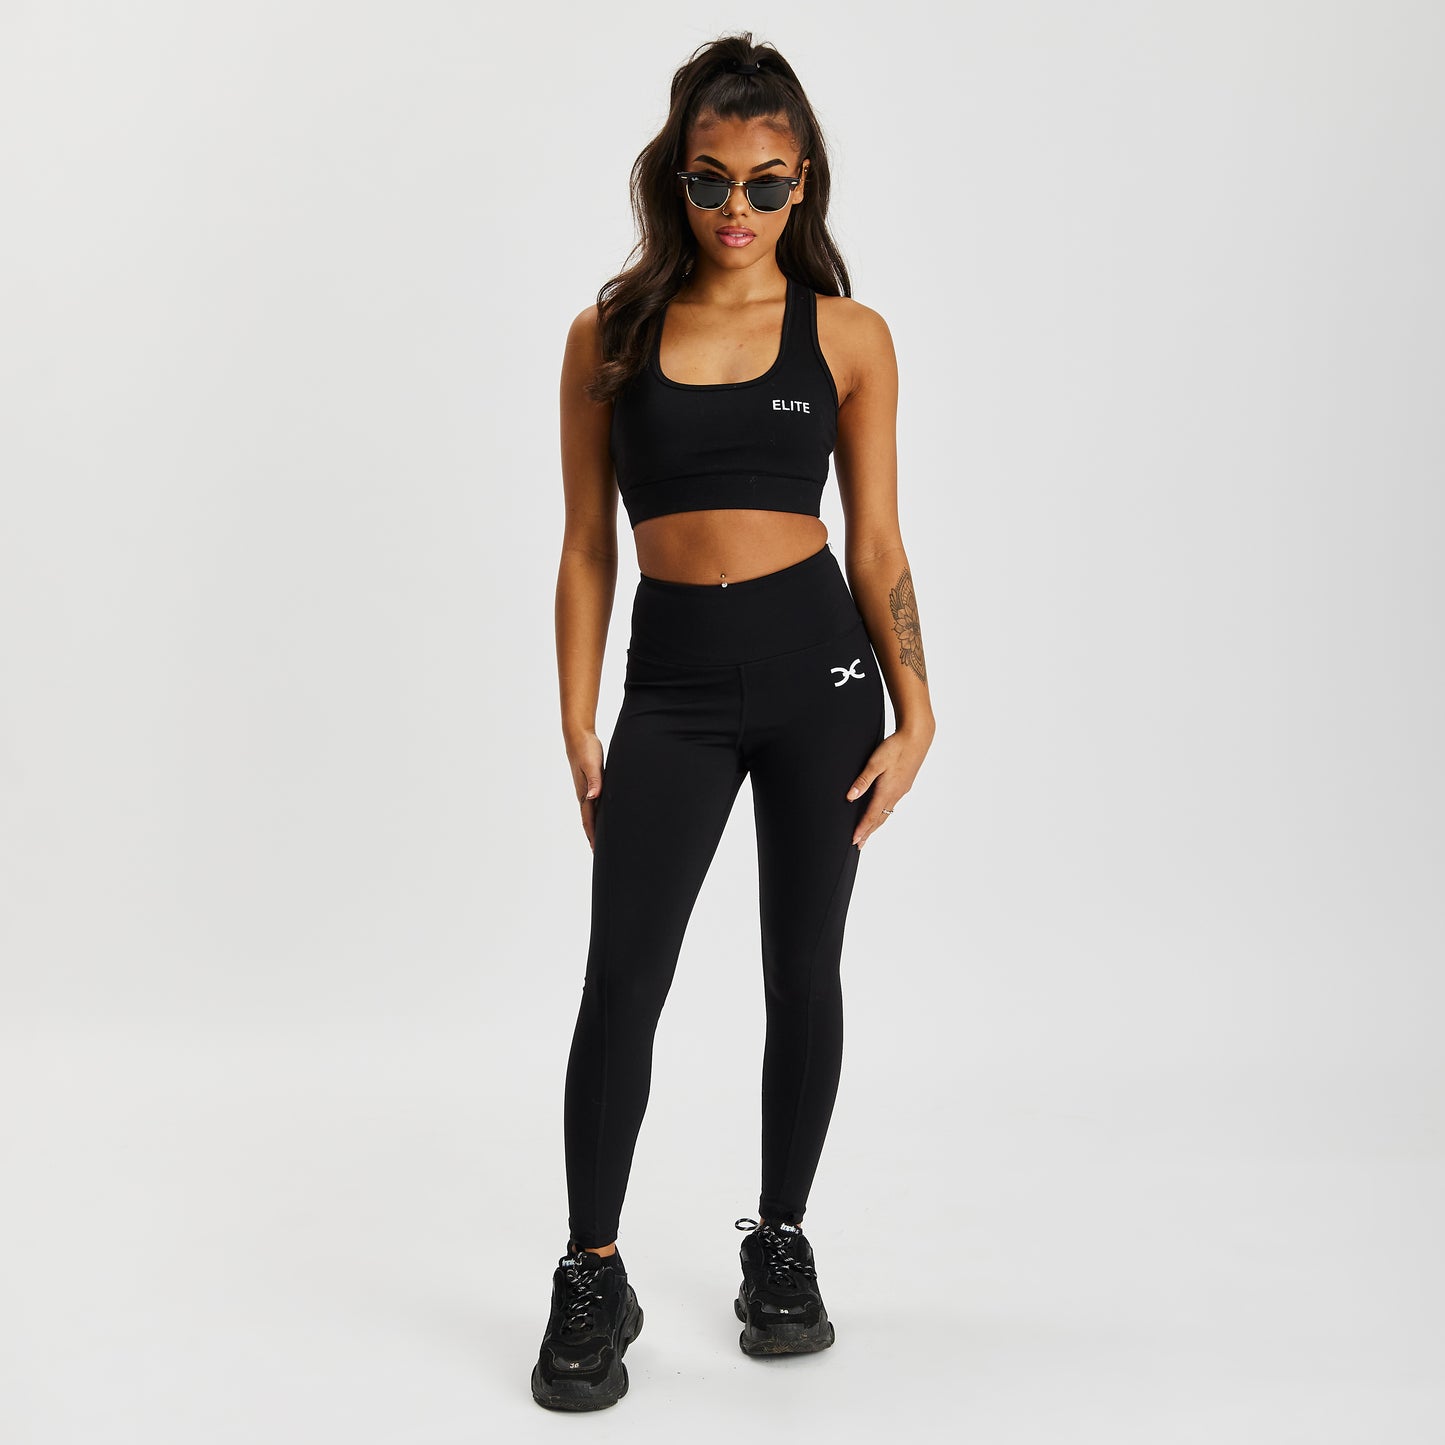 Envolve Midnight black cropped sports bra with racer back and scoop neck